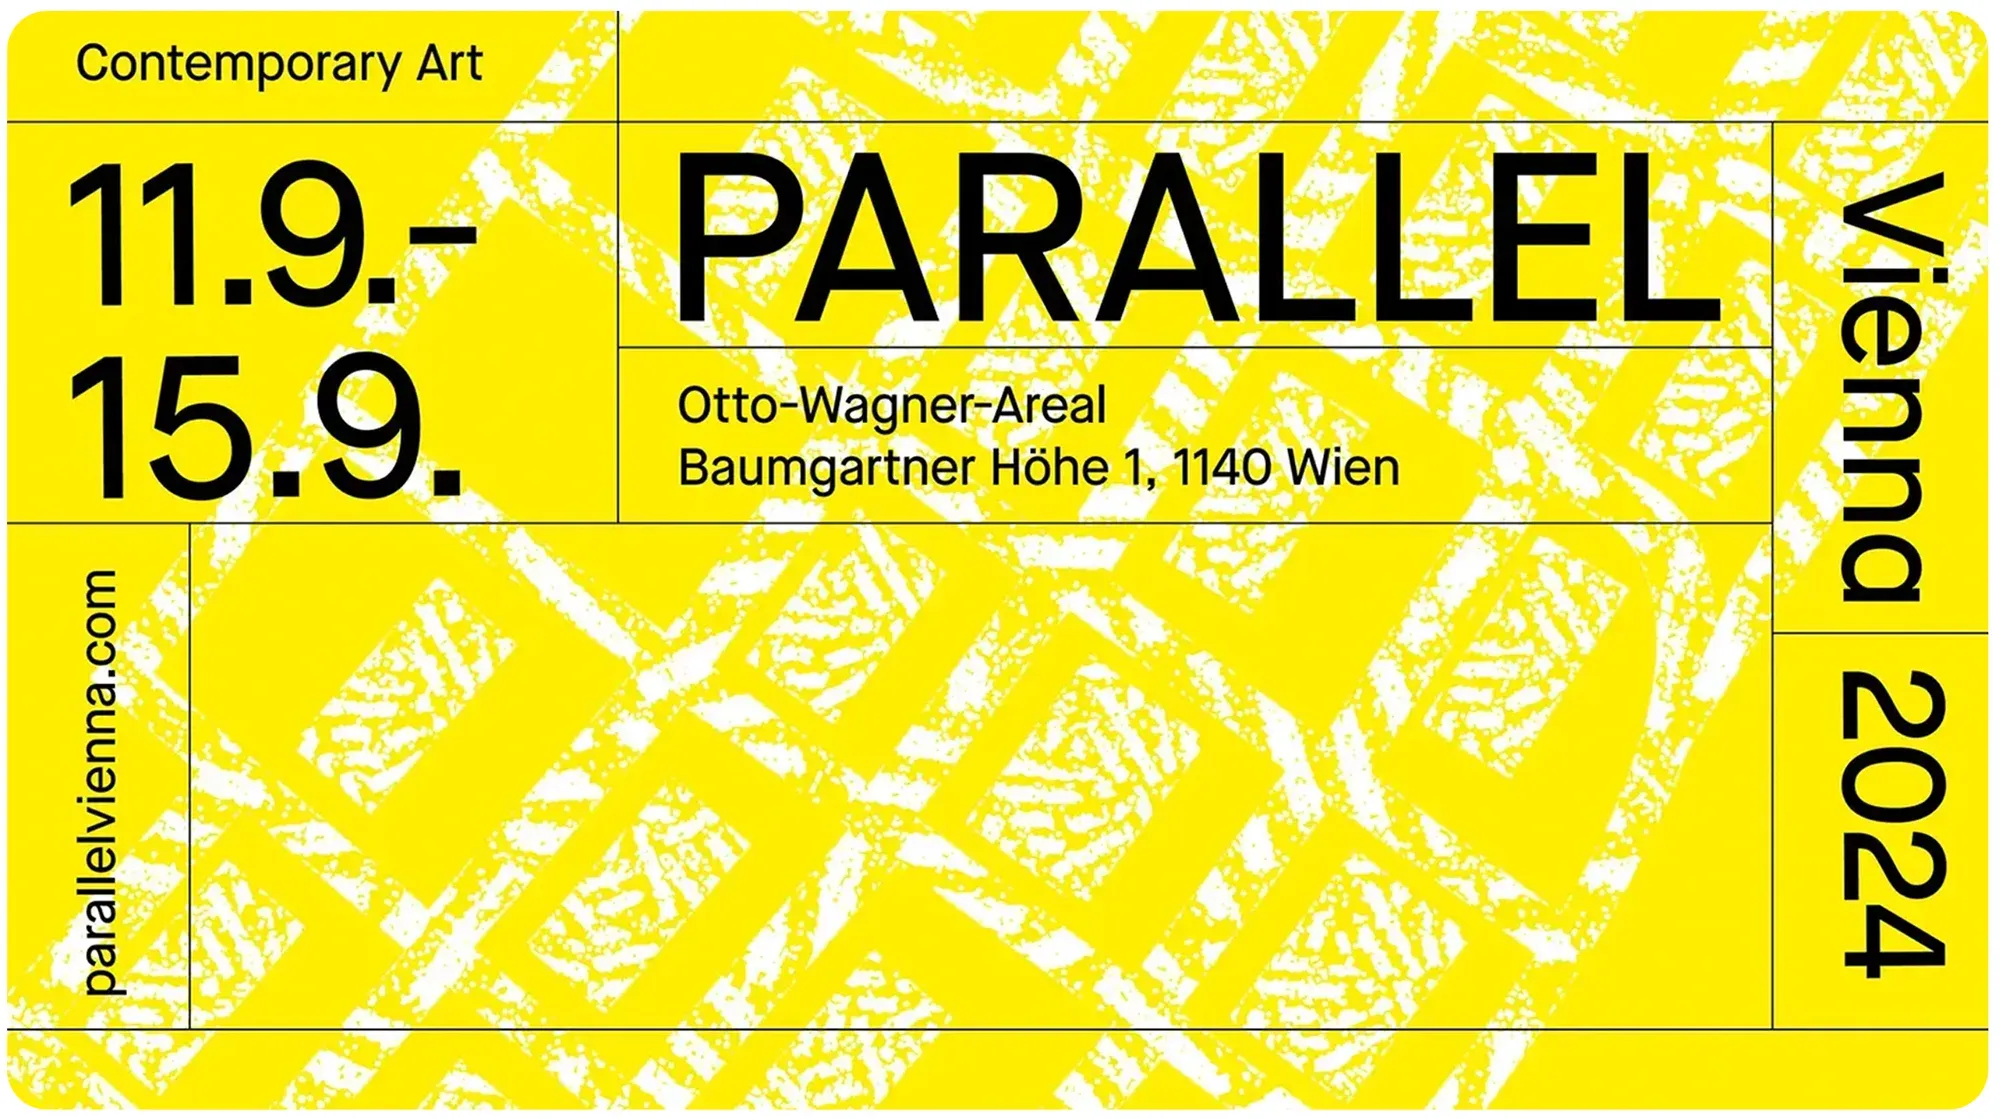 parallel vienna, 2024 and all about you have to know, date, curatorial team, venue, location, art fair 